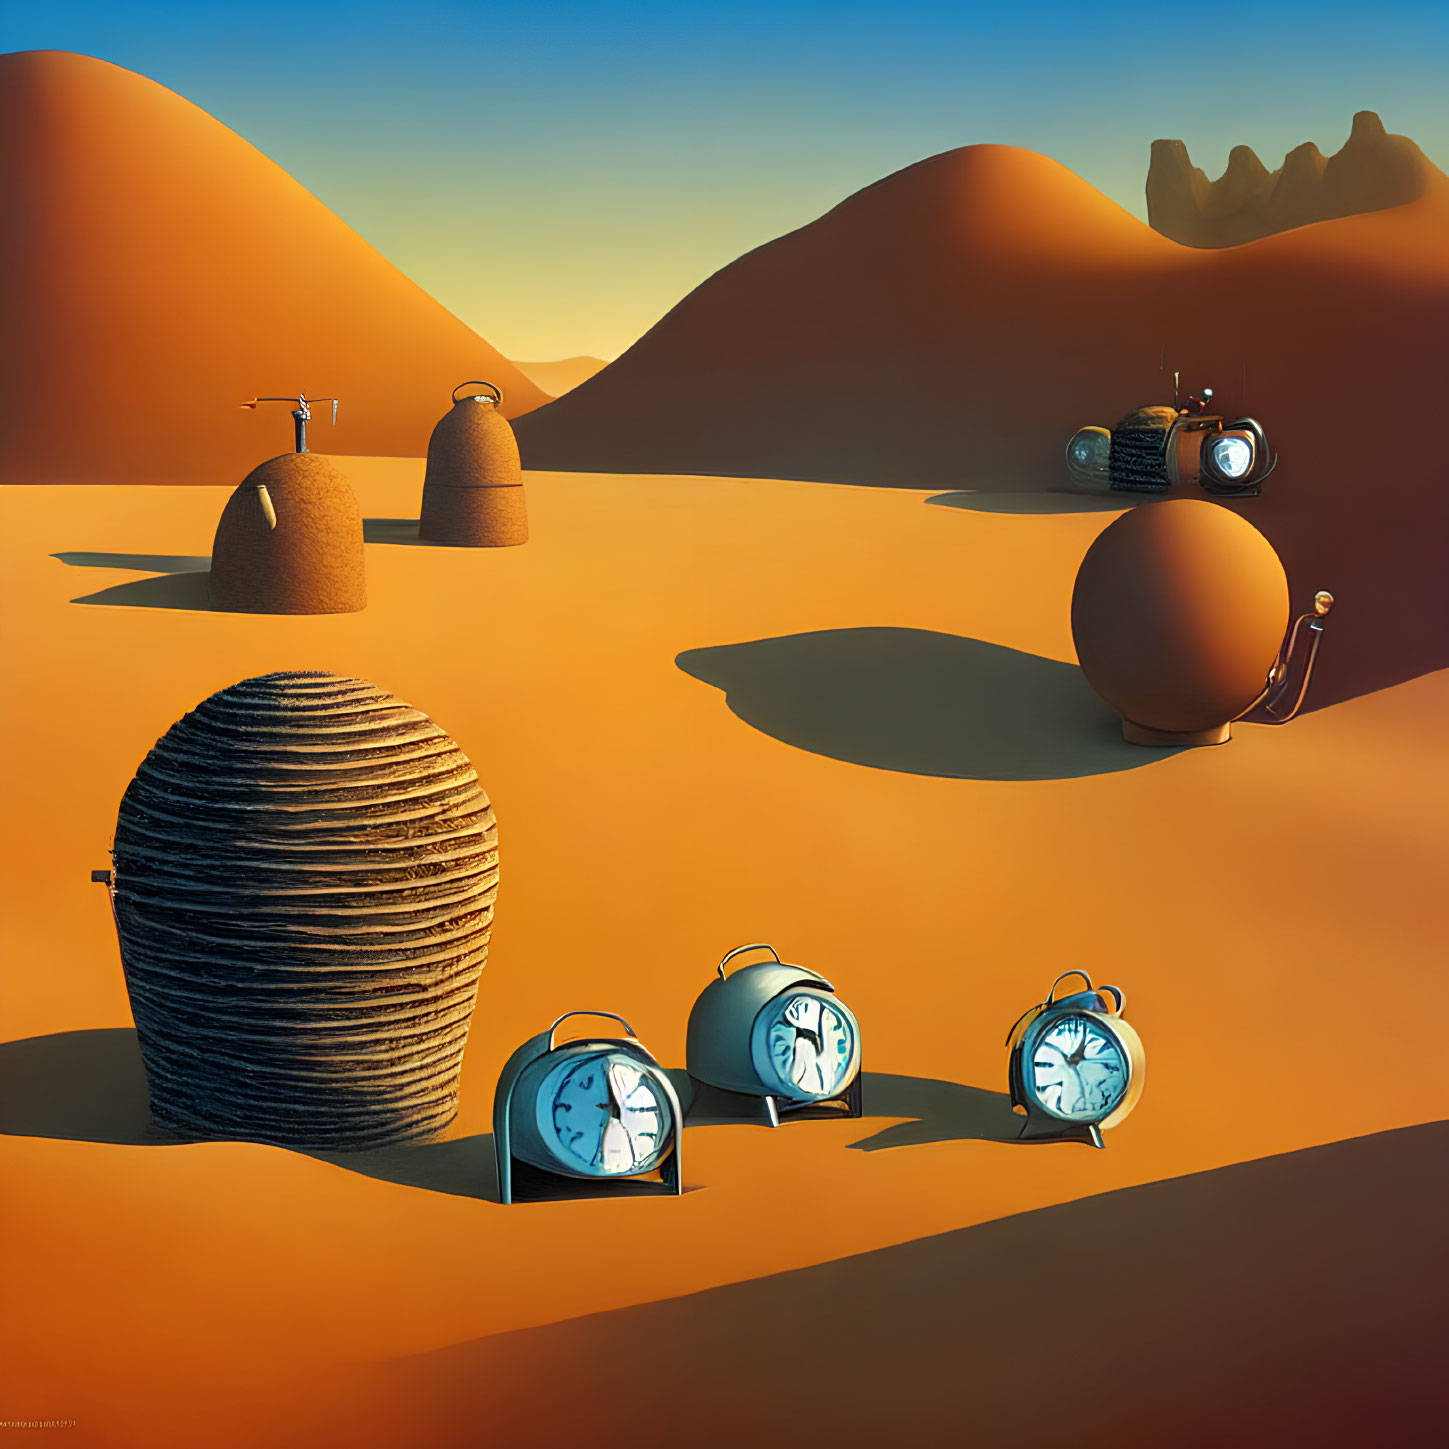 Surreal desert landscape with thread spool hut, faucet-topped dunes, apple on wheels